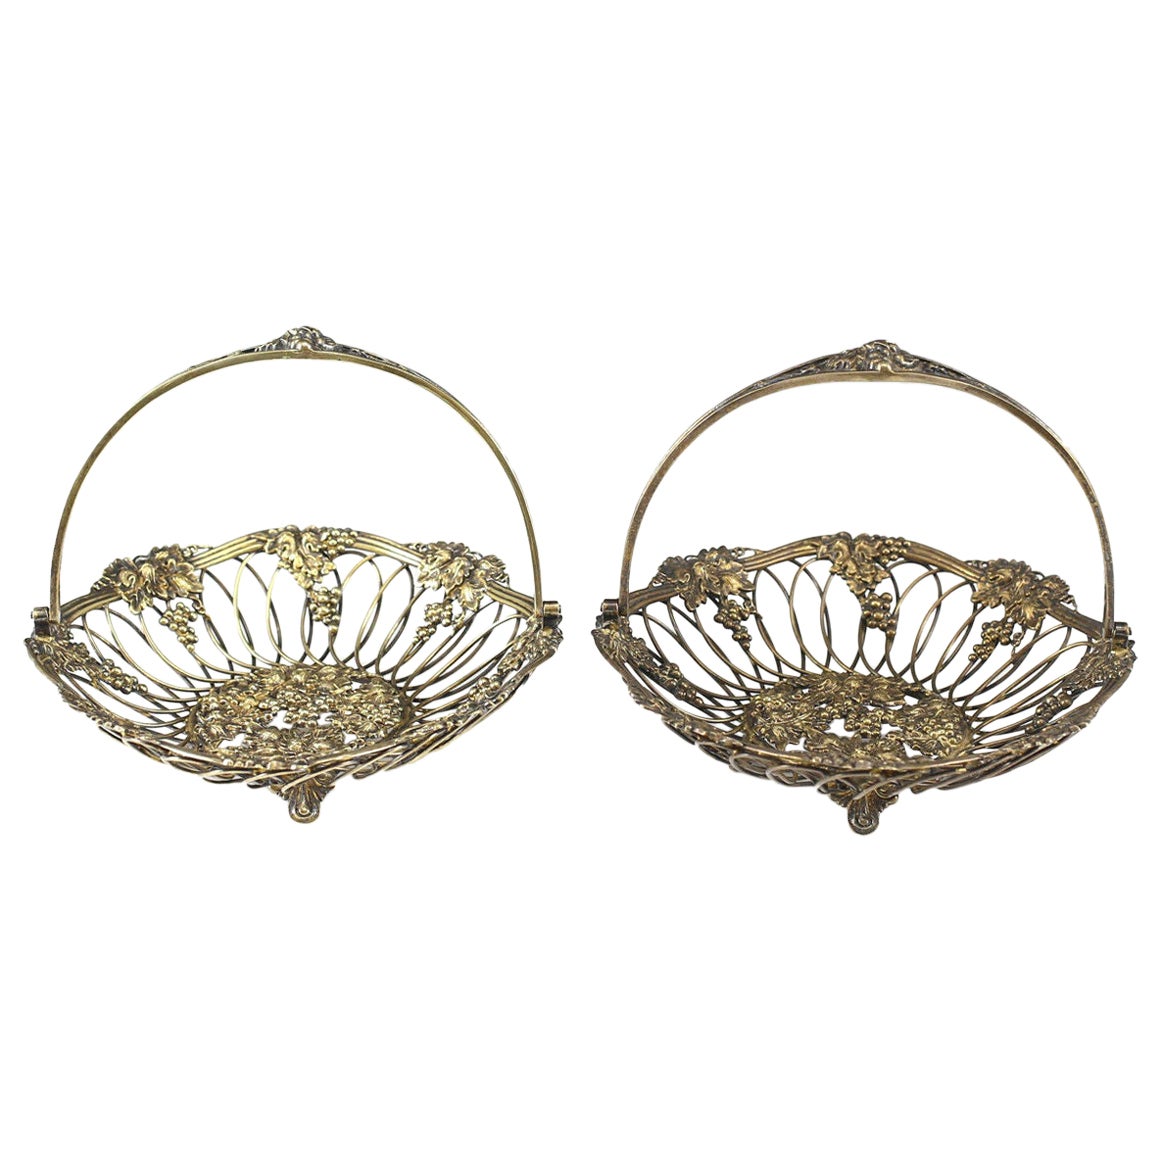 Pair Gilt Sterling Silver Reticulated Swing Handle Footed Baskets, Howard & Co